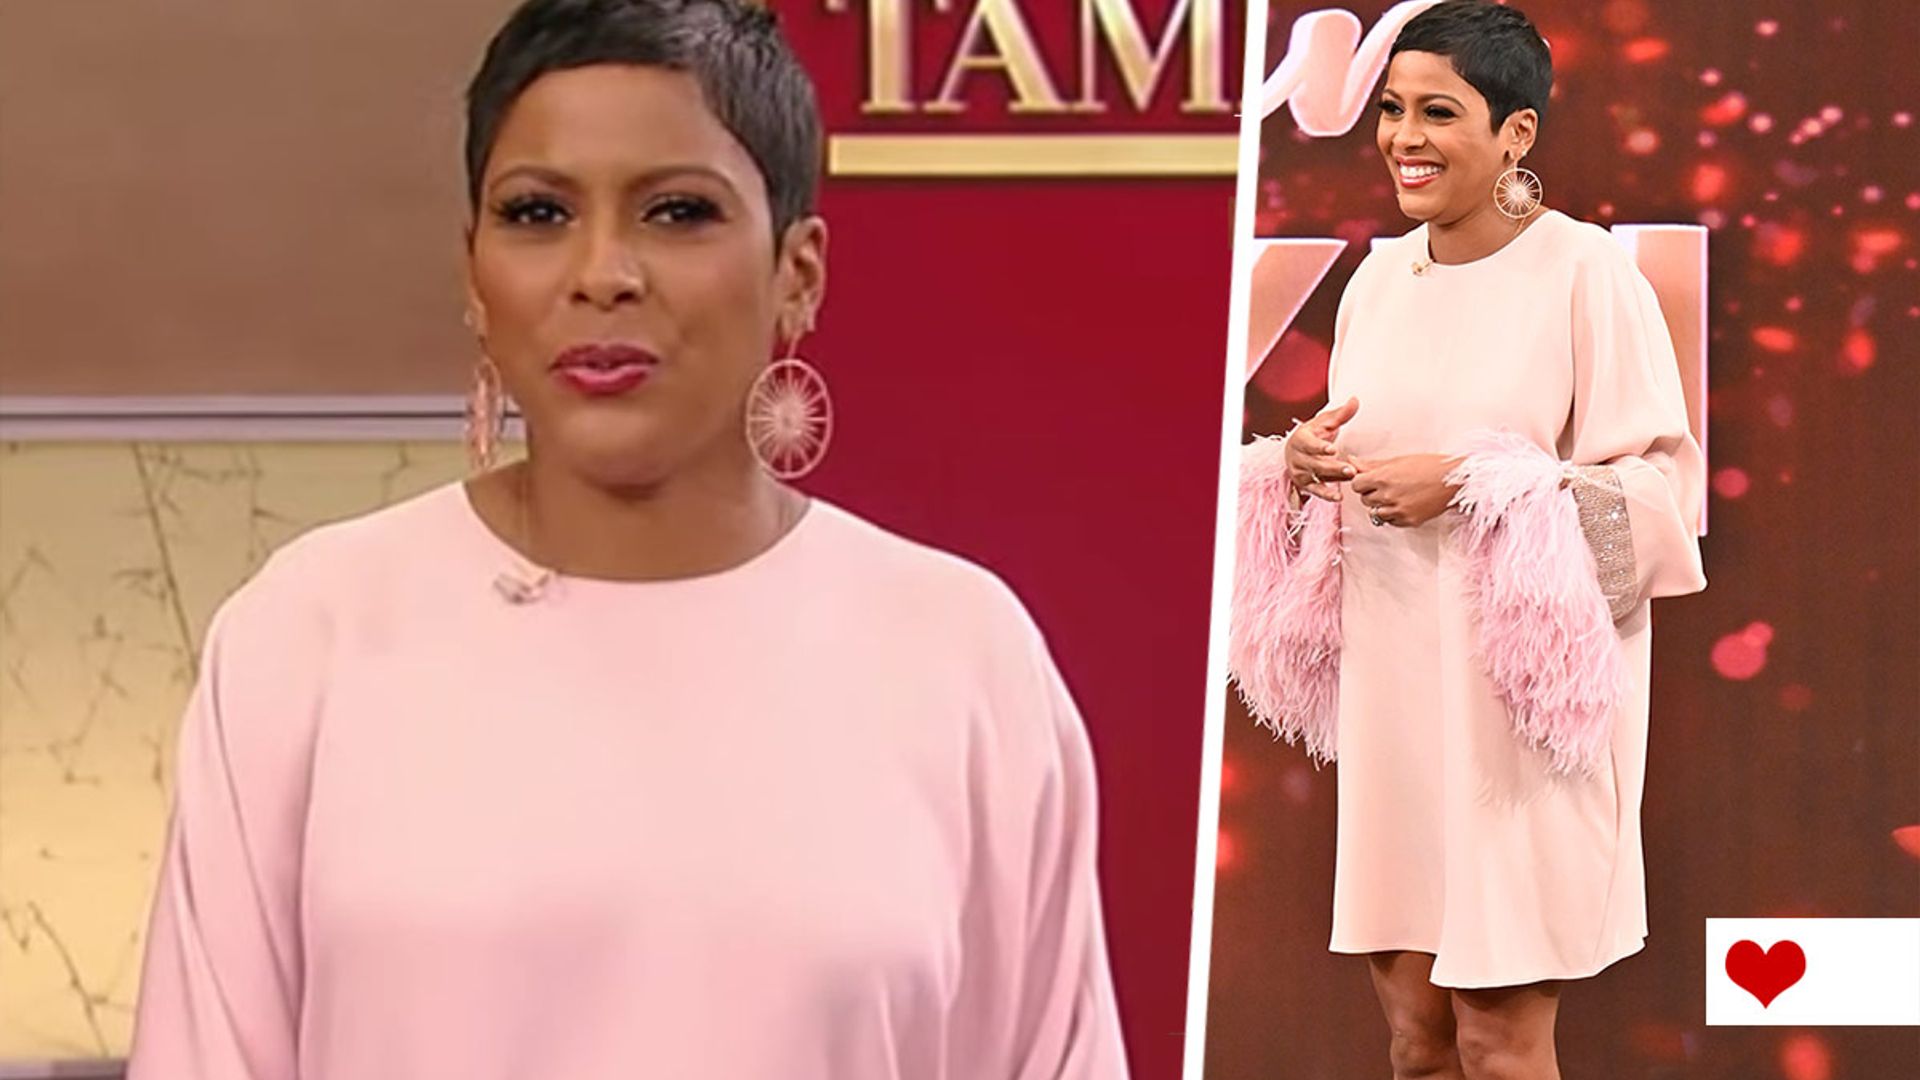 Tamron Hall WOWS in pink feathered dress rocking this year's trickiest fashion trend